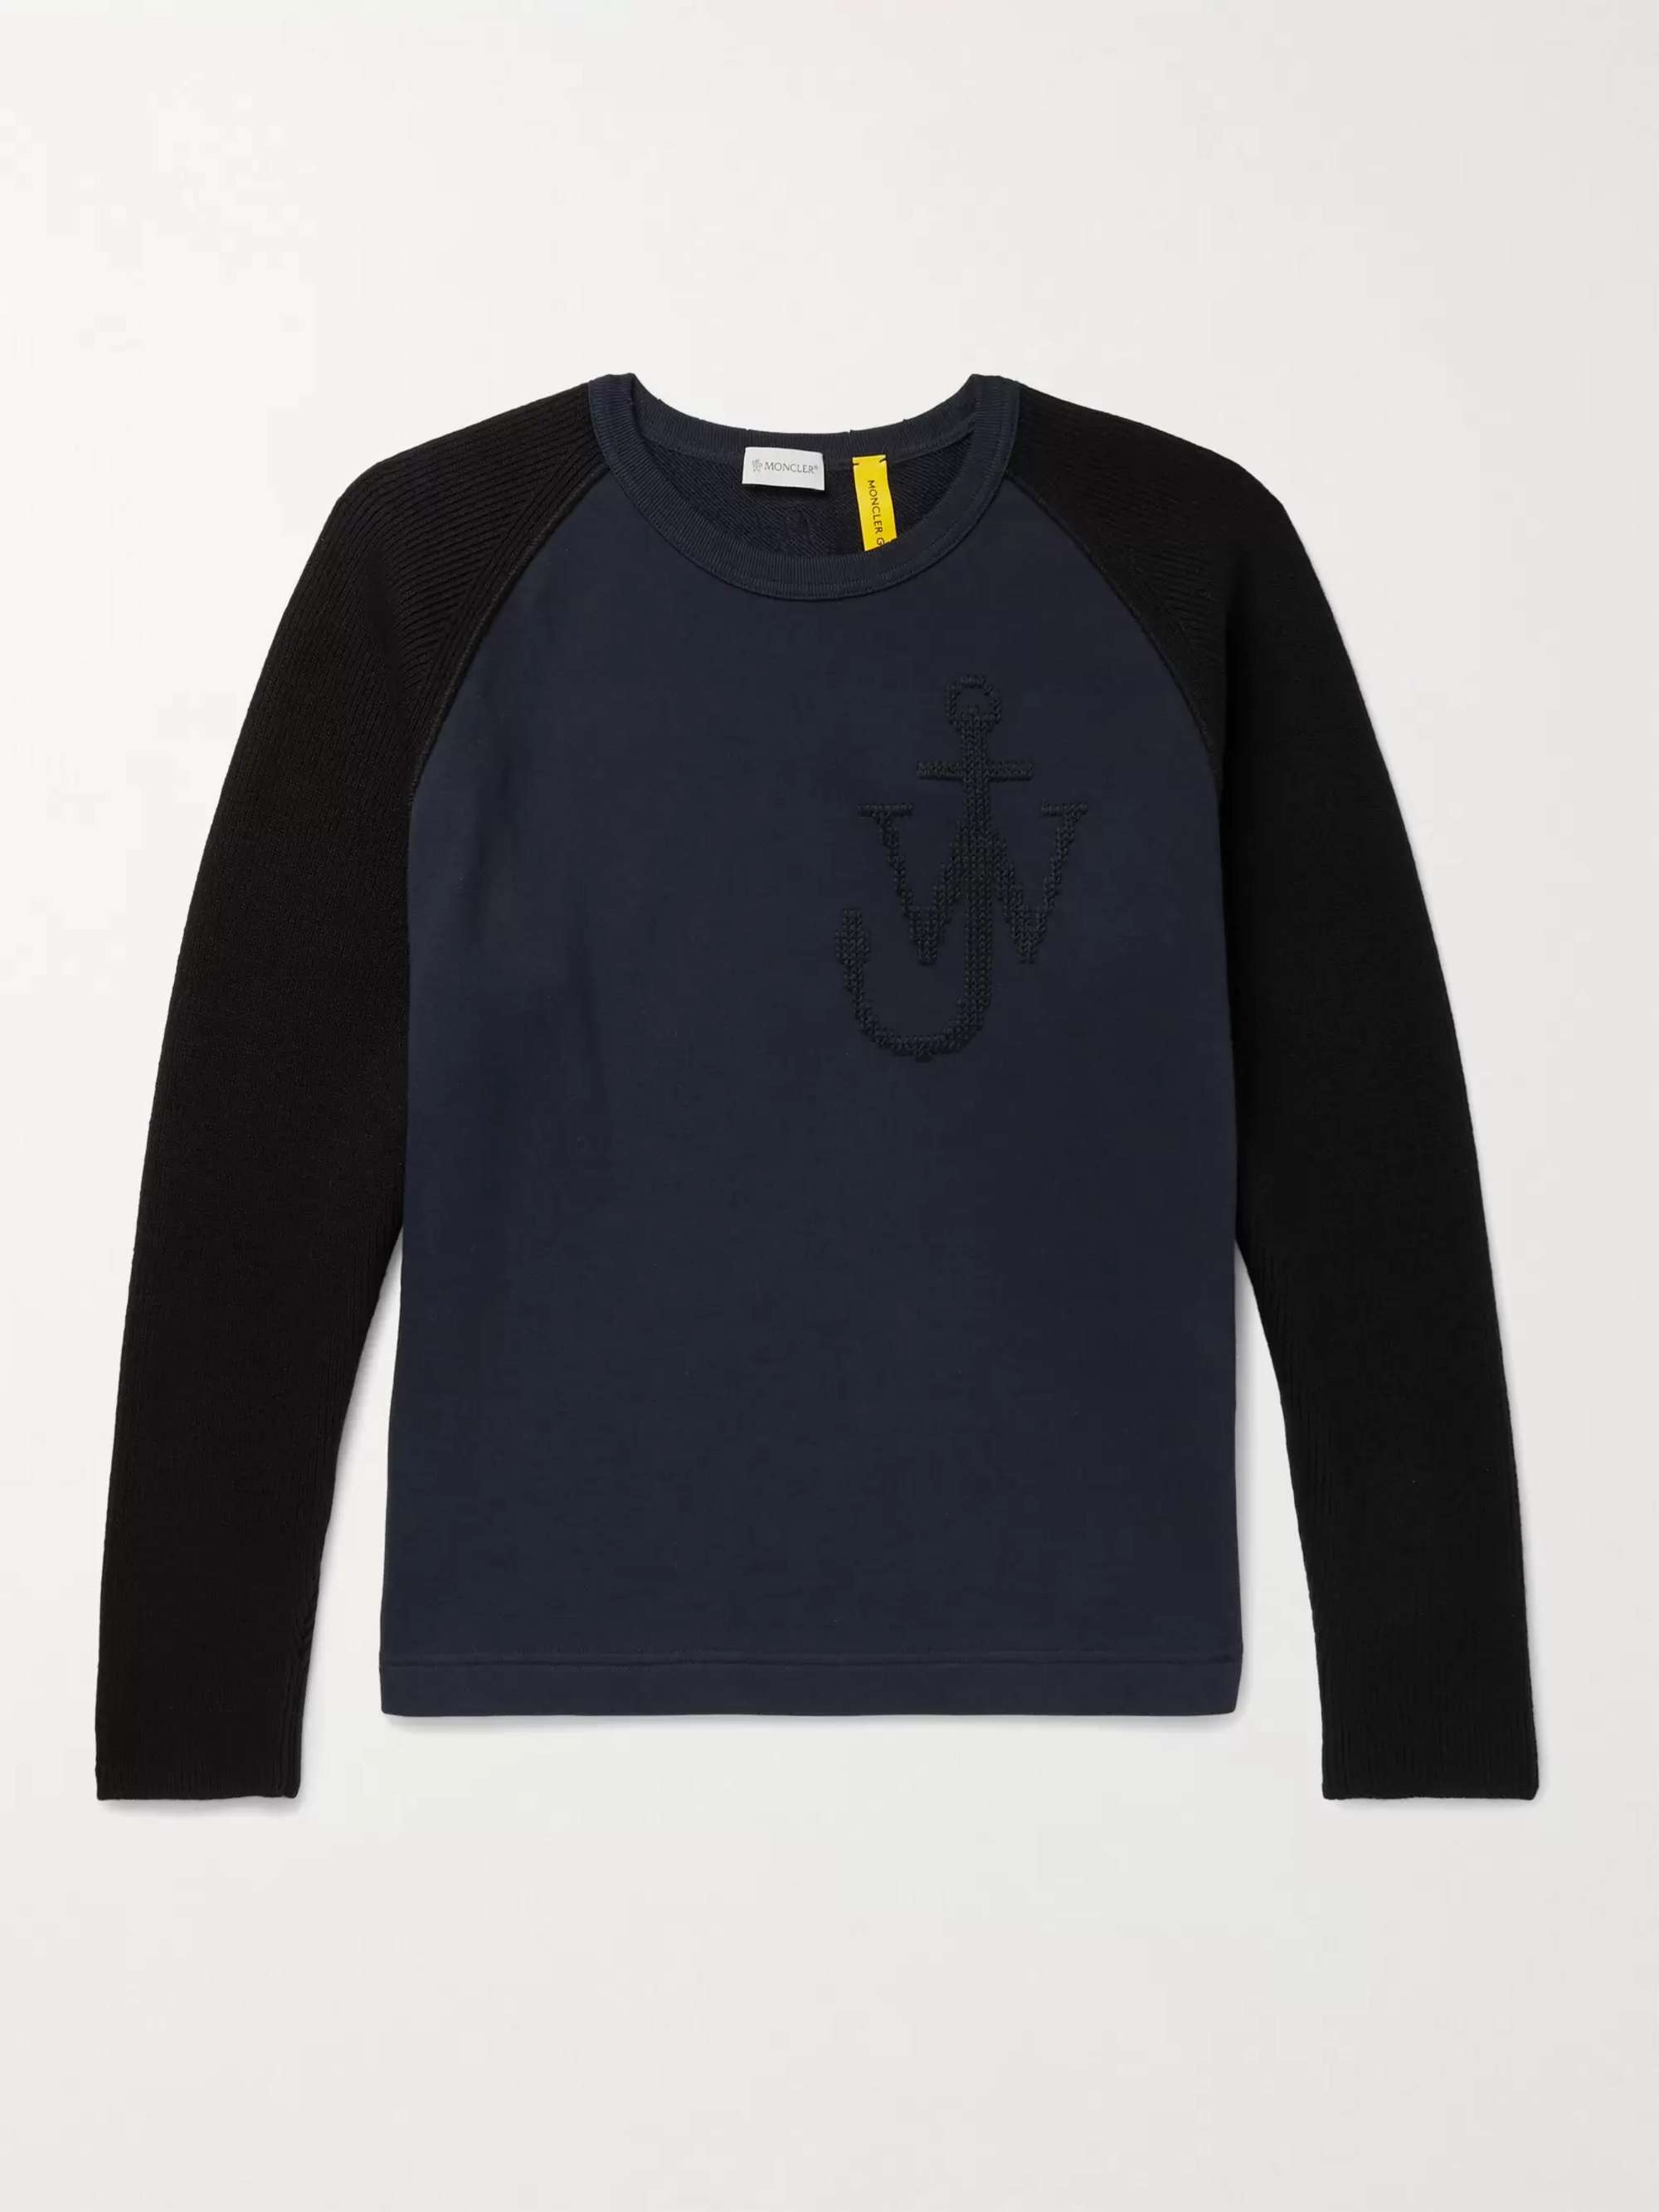 MONCLER GENIUS 1 Moncler JW Anderson Logo-Embroidered Virgin Wool and Loopback Cotton-Jersey Sweatshirt